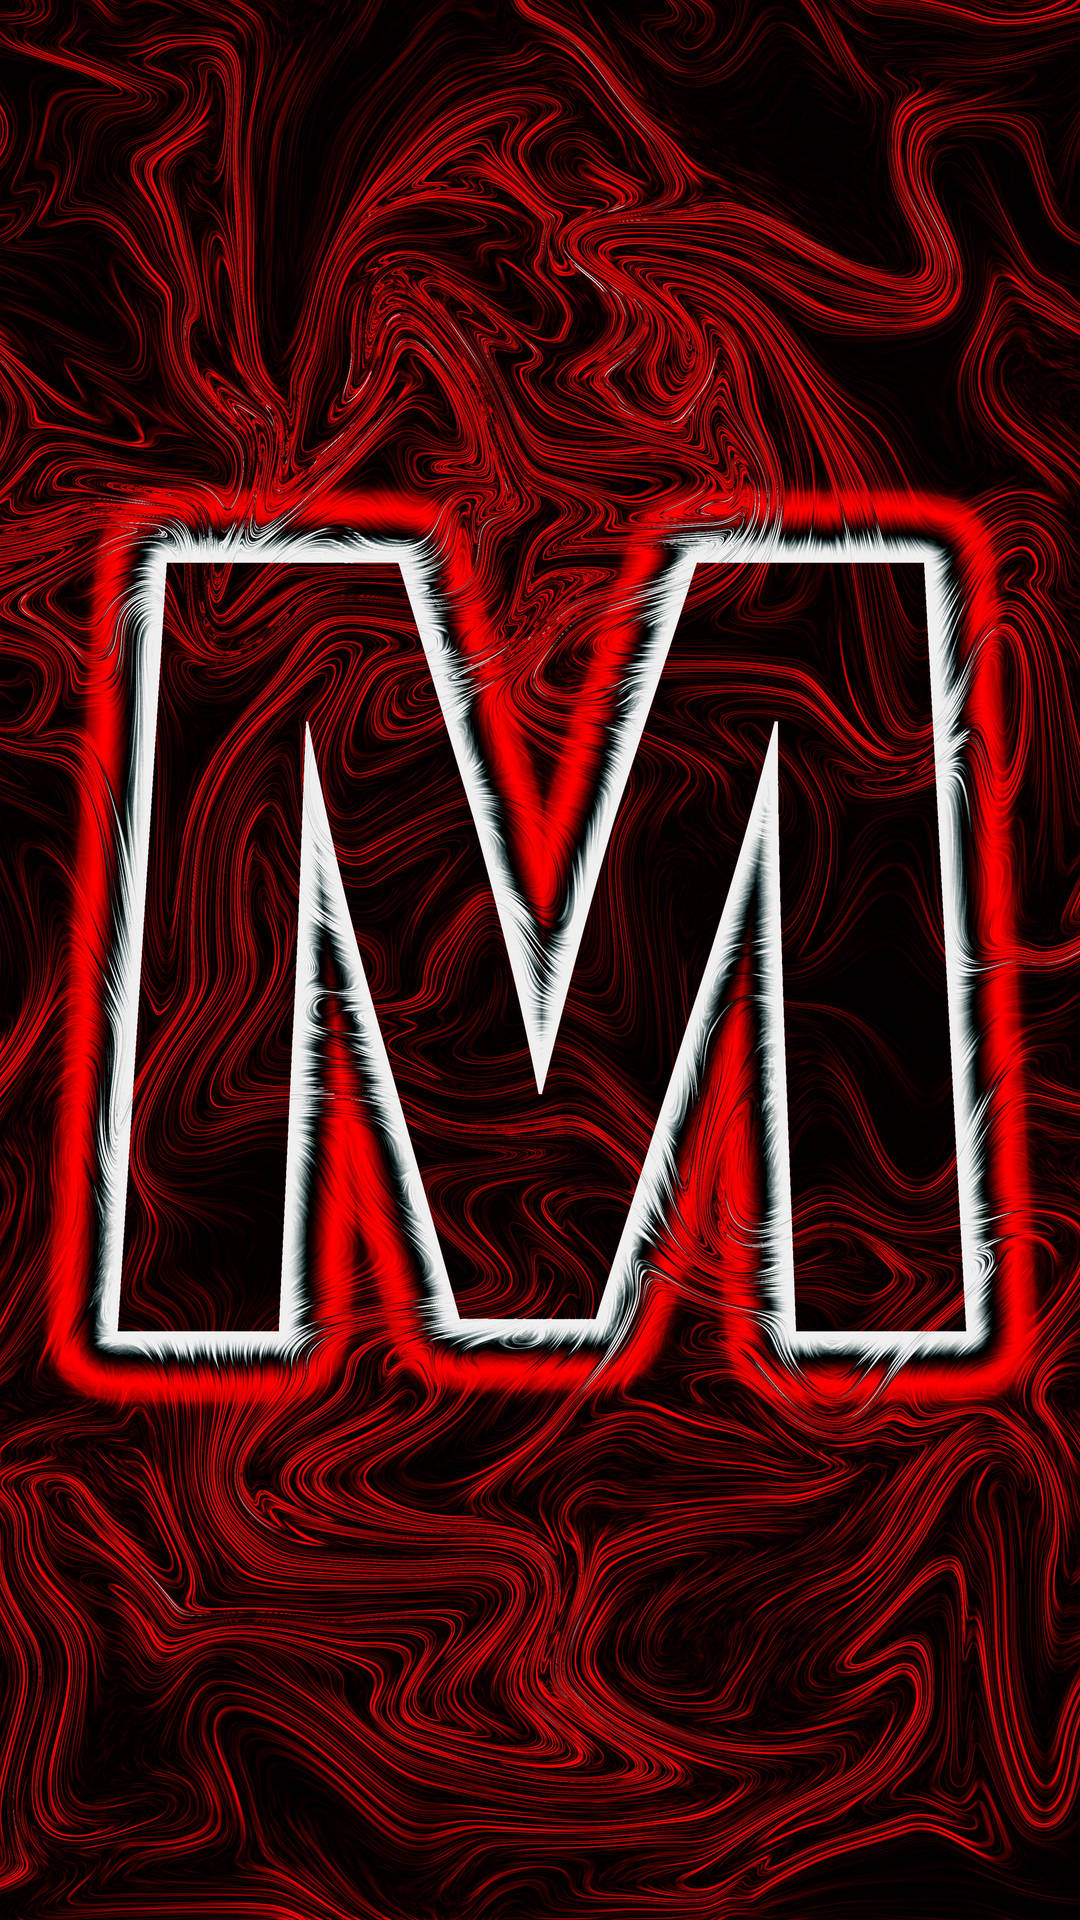 Free Letter M Wallpaper Downloads, [100+] Letter M Wallpapers for FREE |  